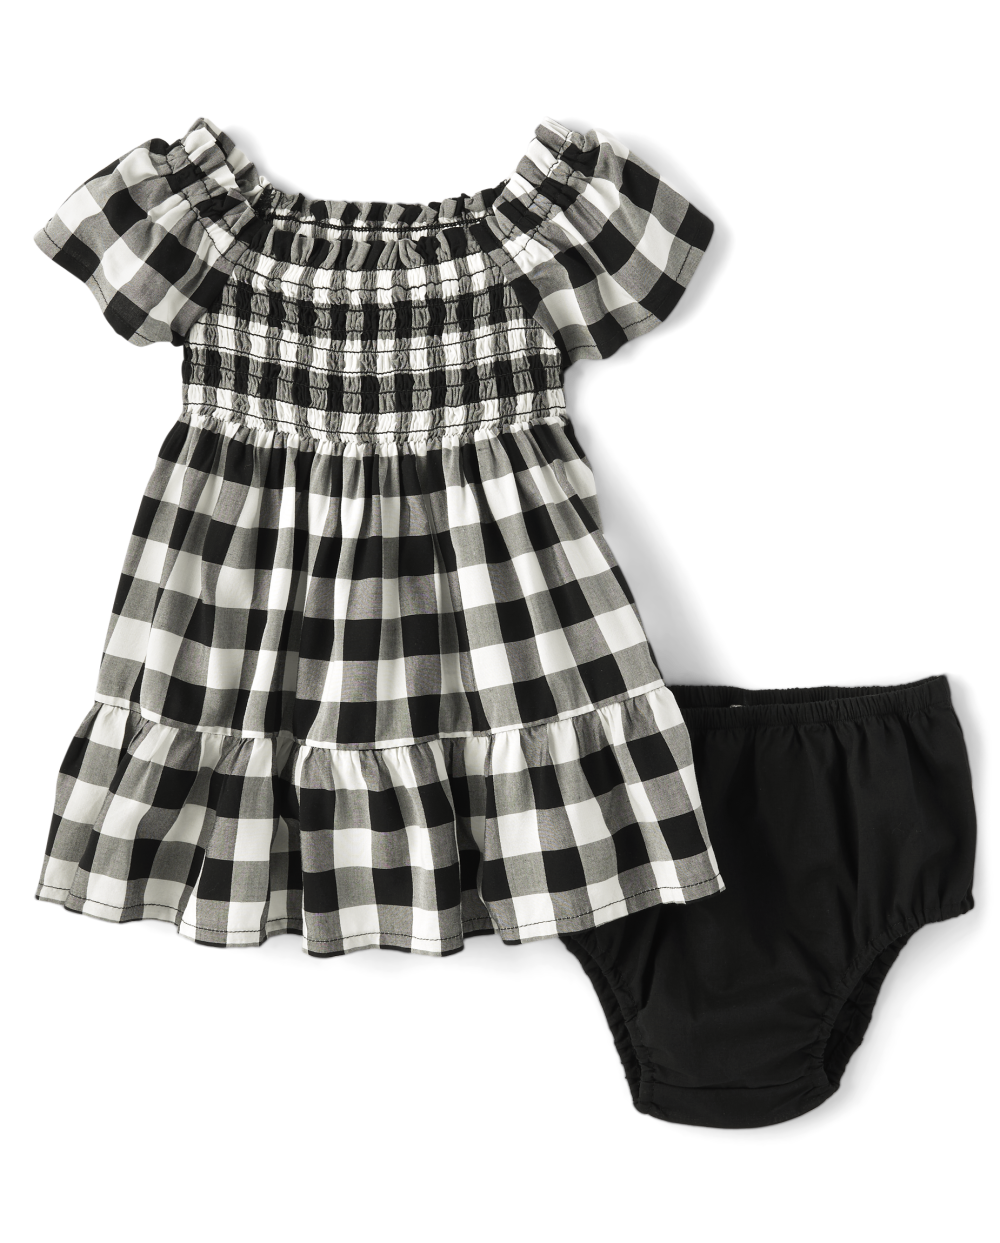 Toddler Elasticized Waistline Smocked Square Neck Short Sleeves Sleeves Above the Knee Checkered Gingham Print Dress With Ruffles